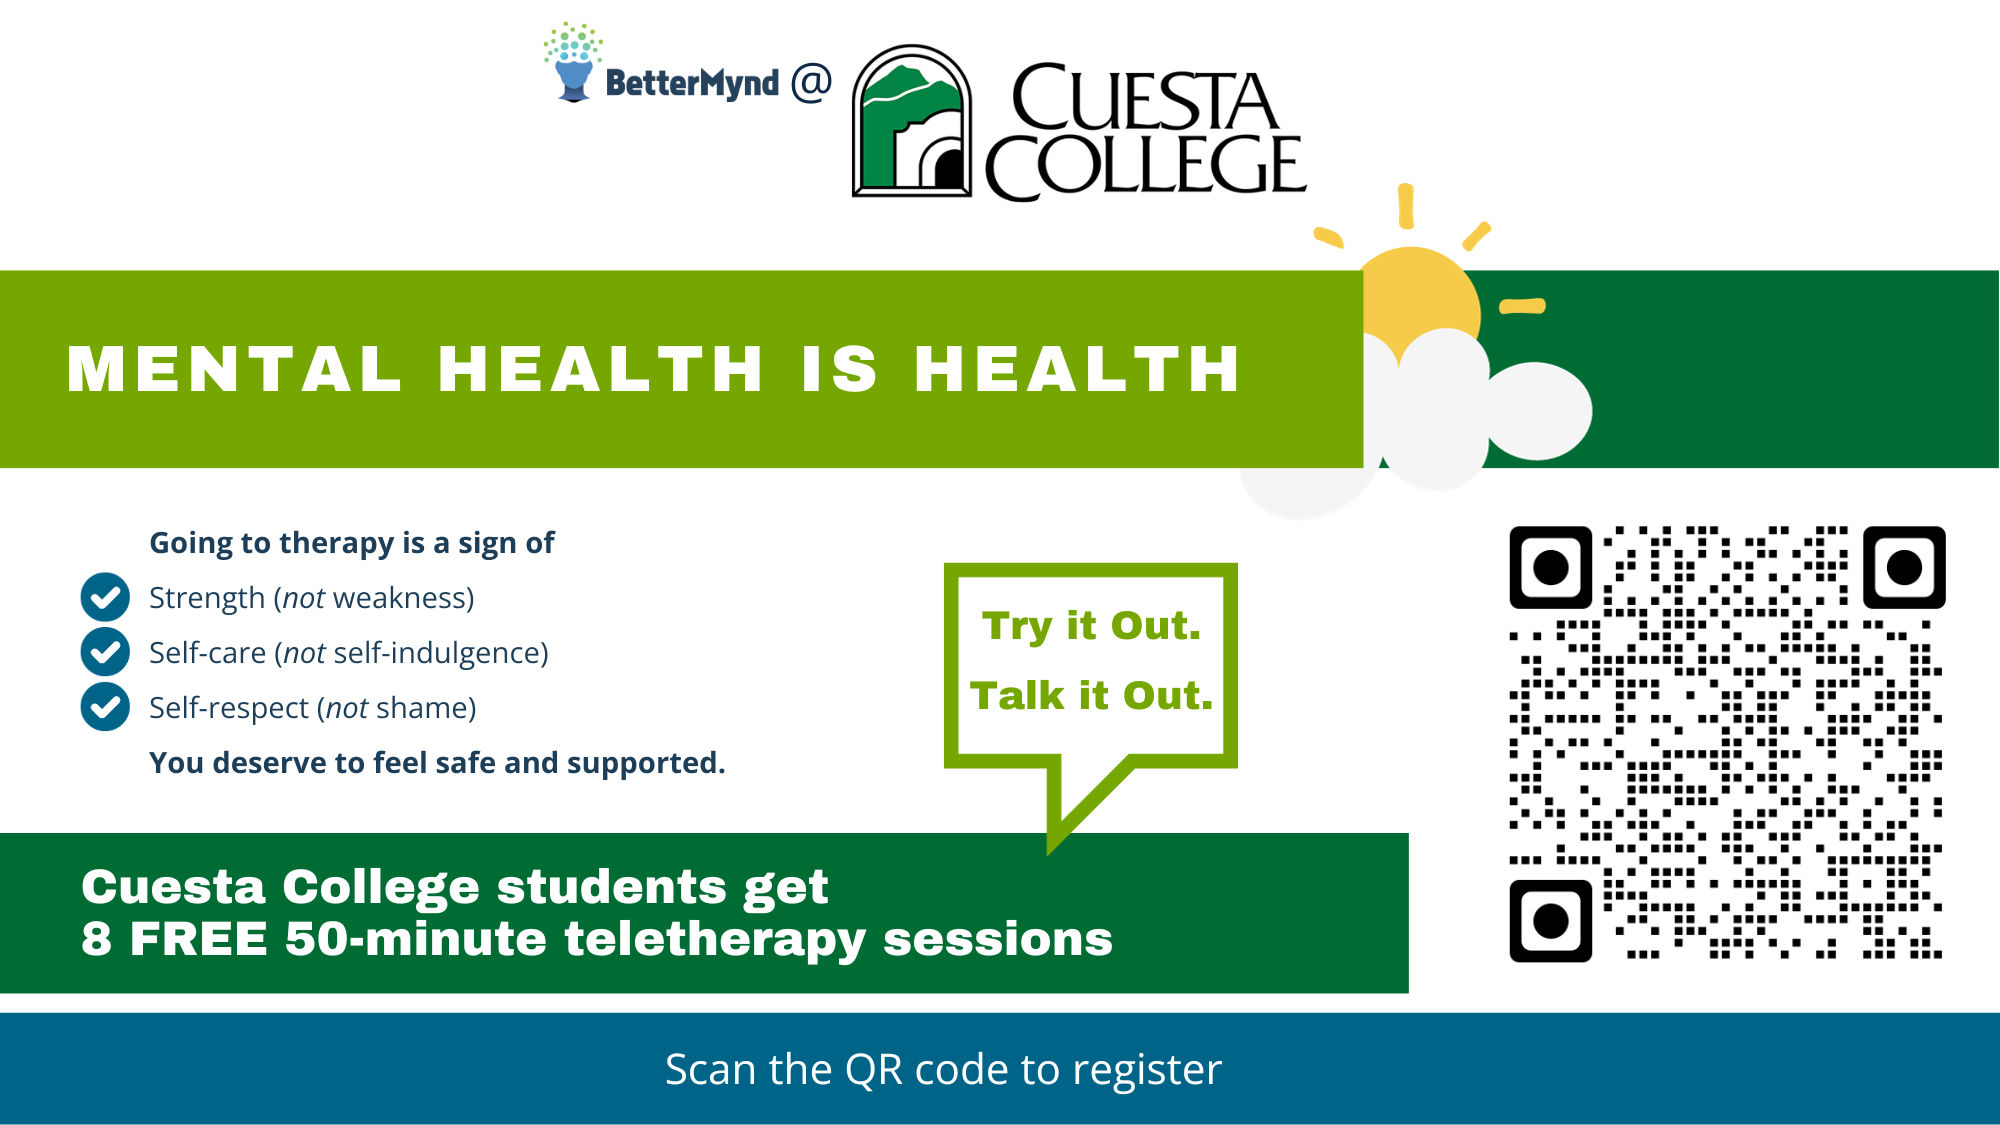 Cuesta College in with partnership with BetterMynd is offering 8 free 50-minute teletherapy sessions to Cuesta College students. Scan the QR code to register.